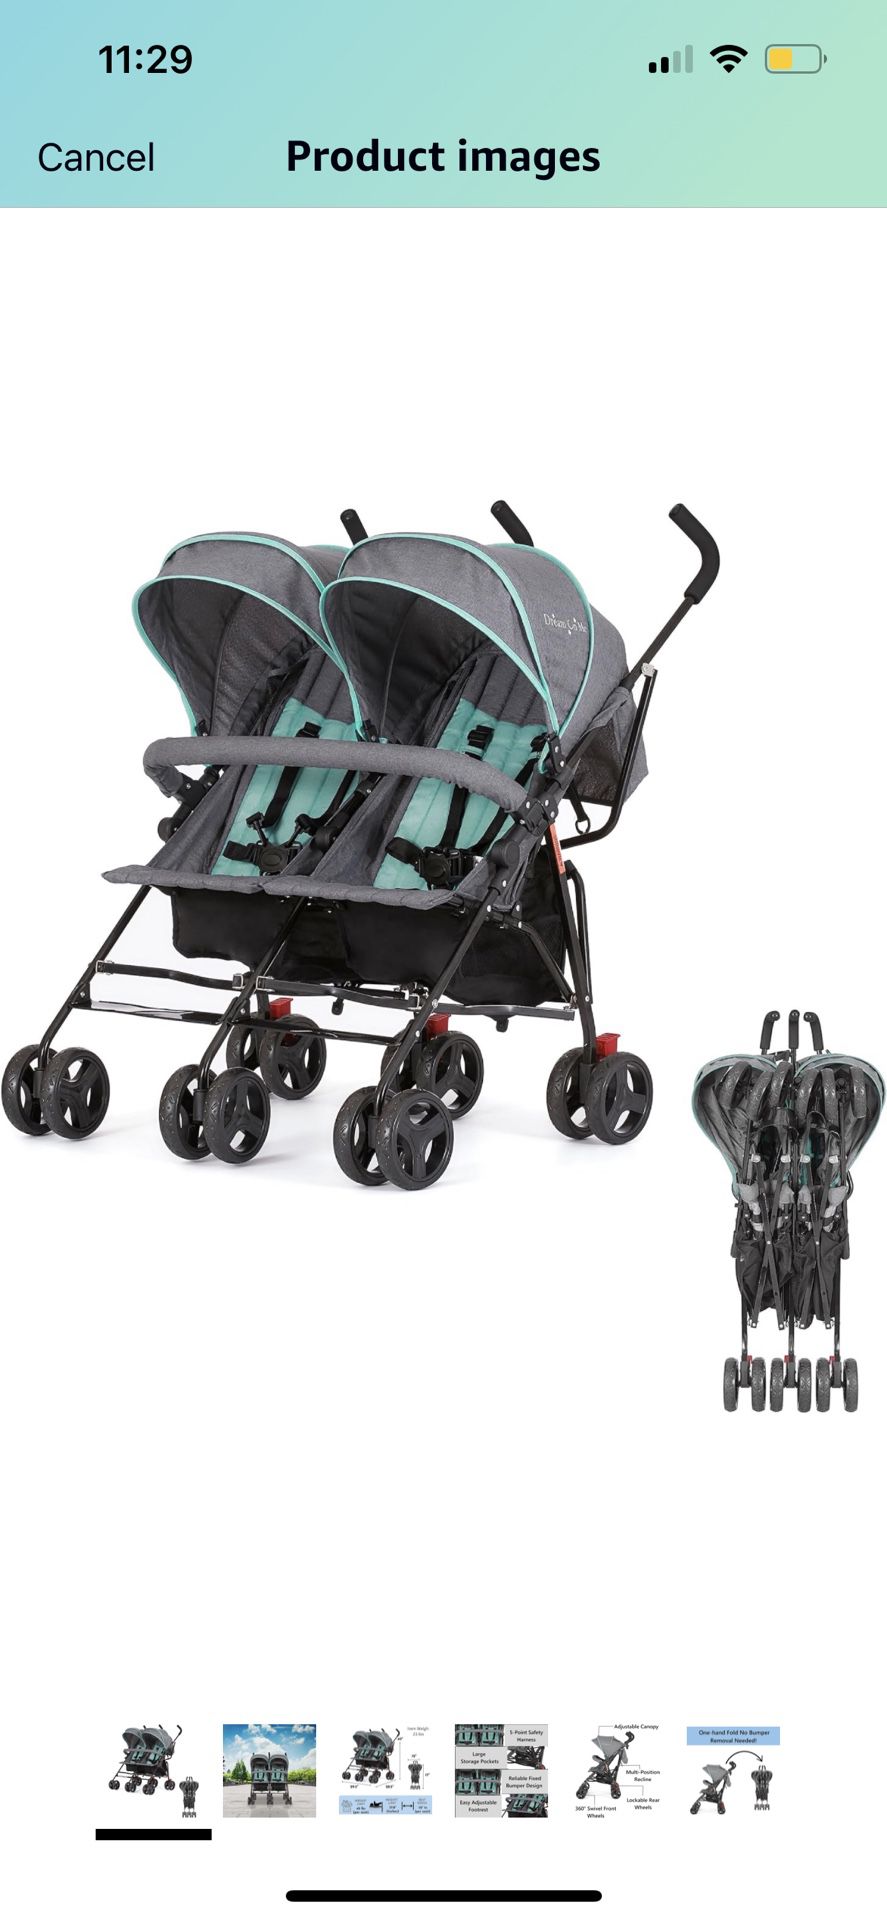 Twin Umbrella Stroller in Mint, Lightweight Double Stroller for Infant & Toddler, Compact Easy Fold, Large Storage Basket, Large and Adjustable Canopy